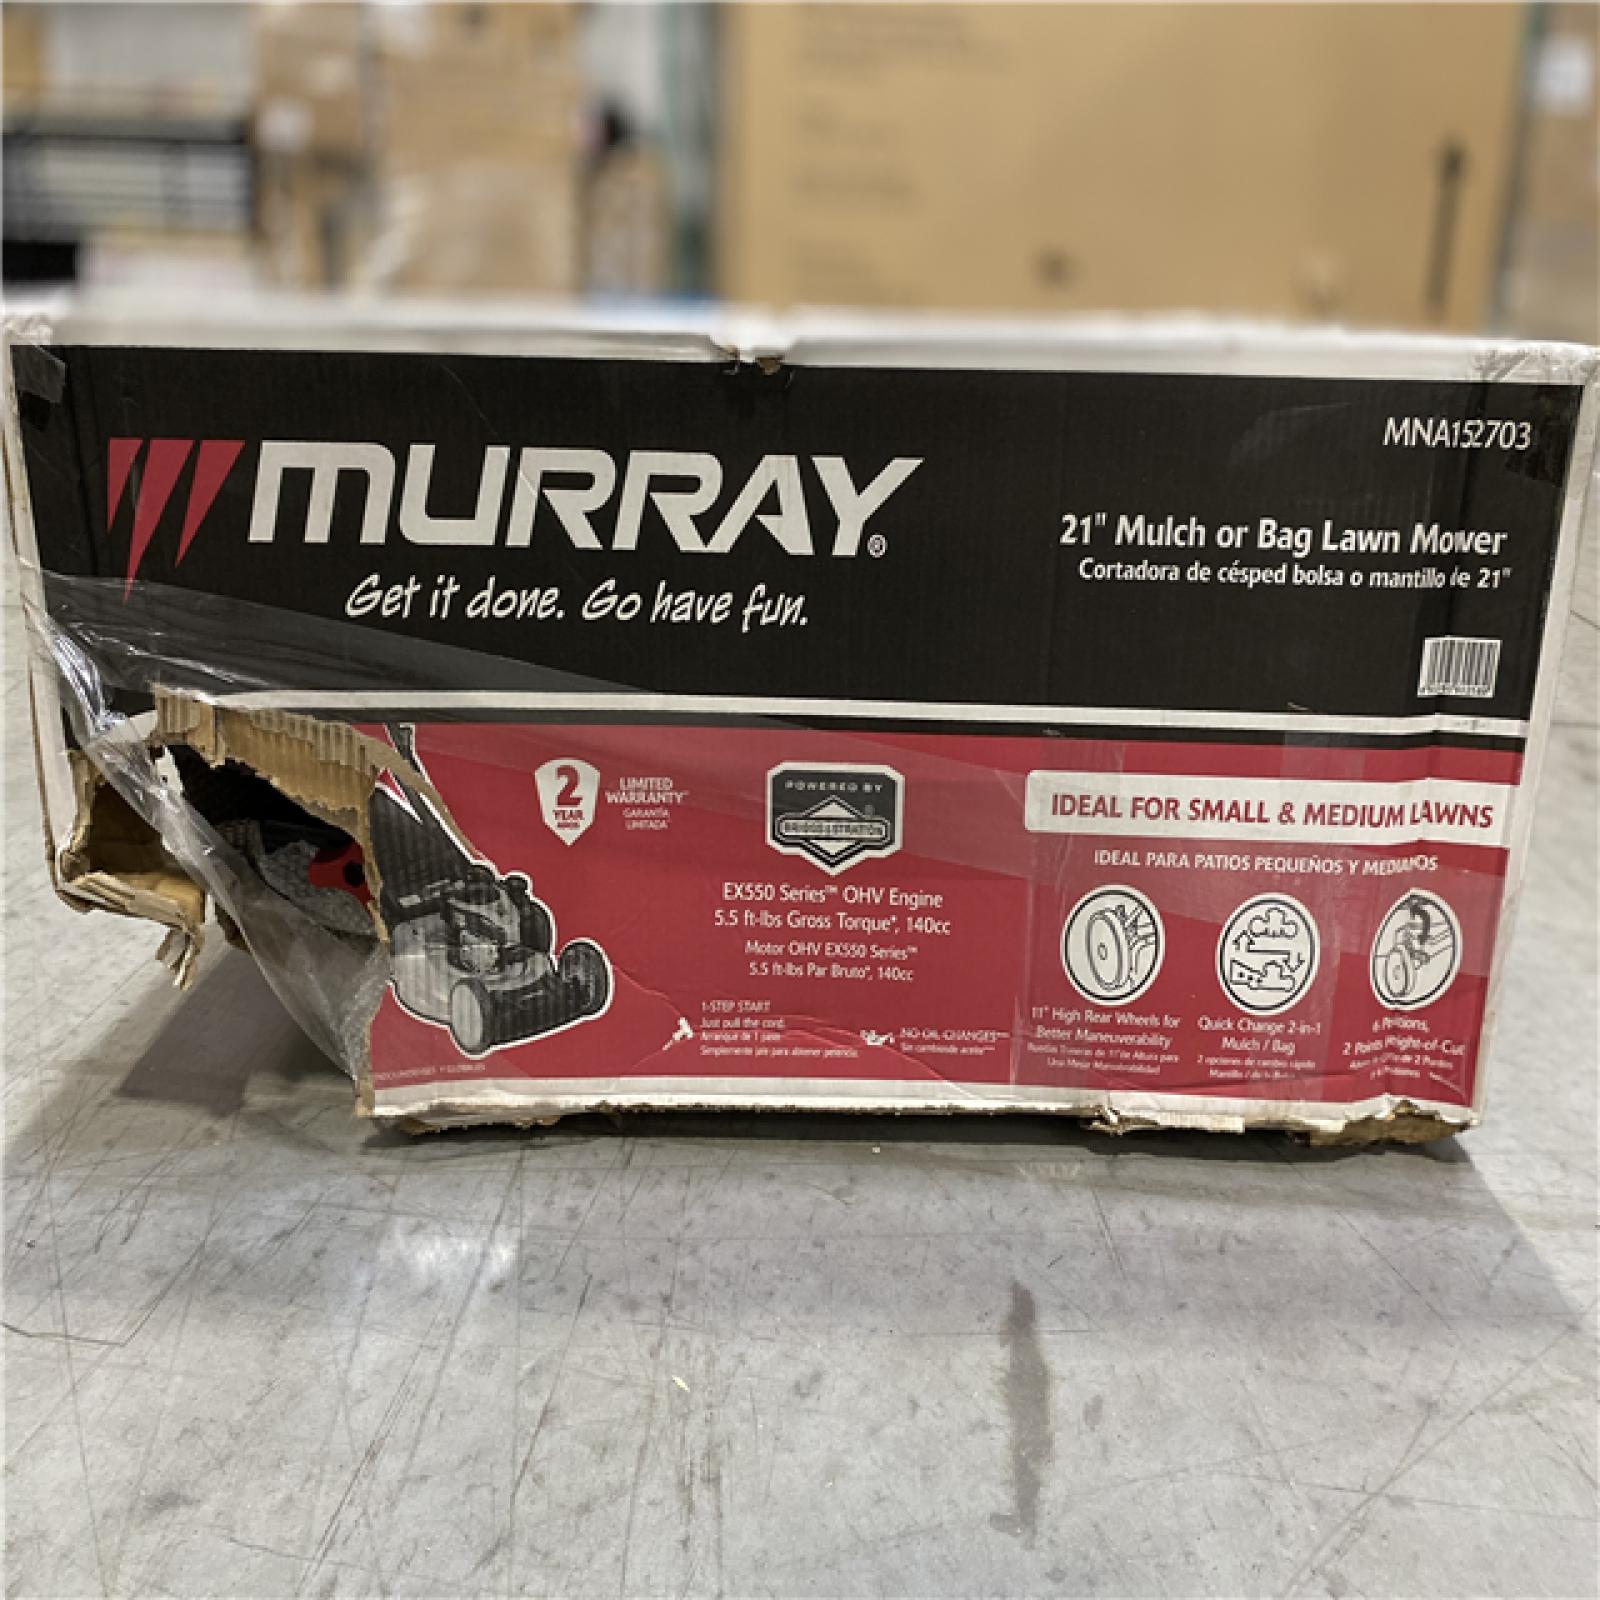 DALLAS LOCATION - Murray 21 in. 140 cc Briggs and Stratton Walk Behind Gas Push Lawn Mower with Height Adjustment and with Mulch Bag